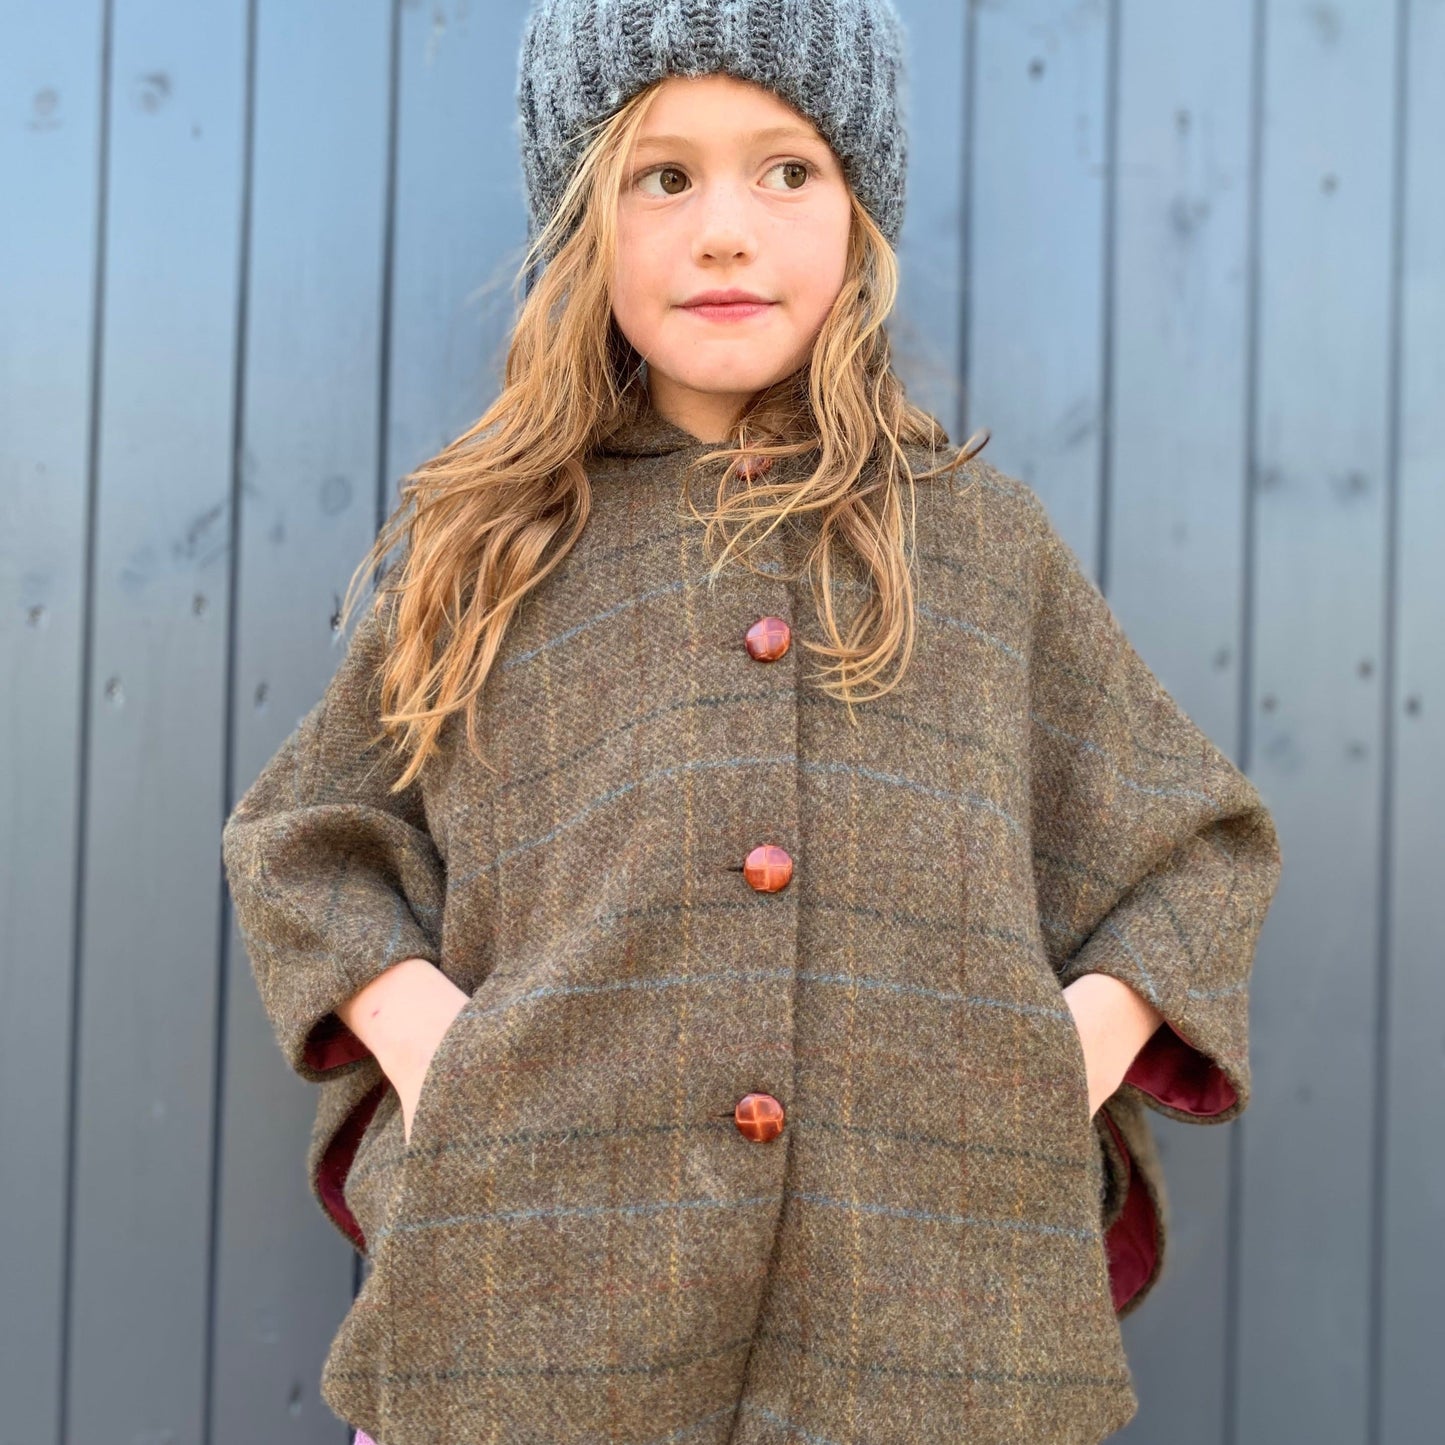 SAMPLE SALE 'Iris' Girls brown 100% Shetland Wool checked hooded cape - Christopher Robin SIZE 4-7 years